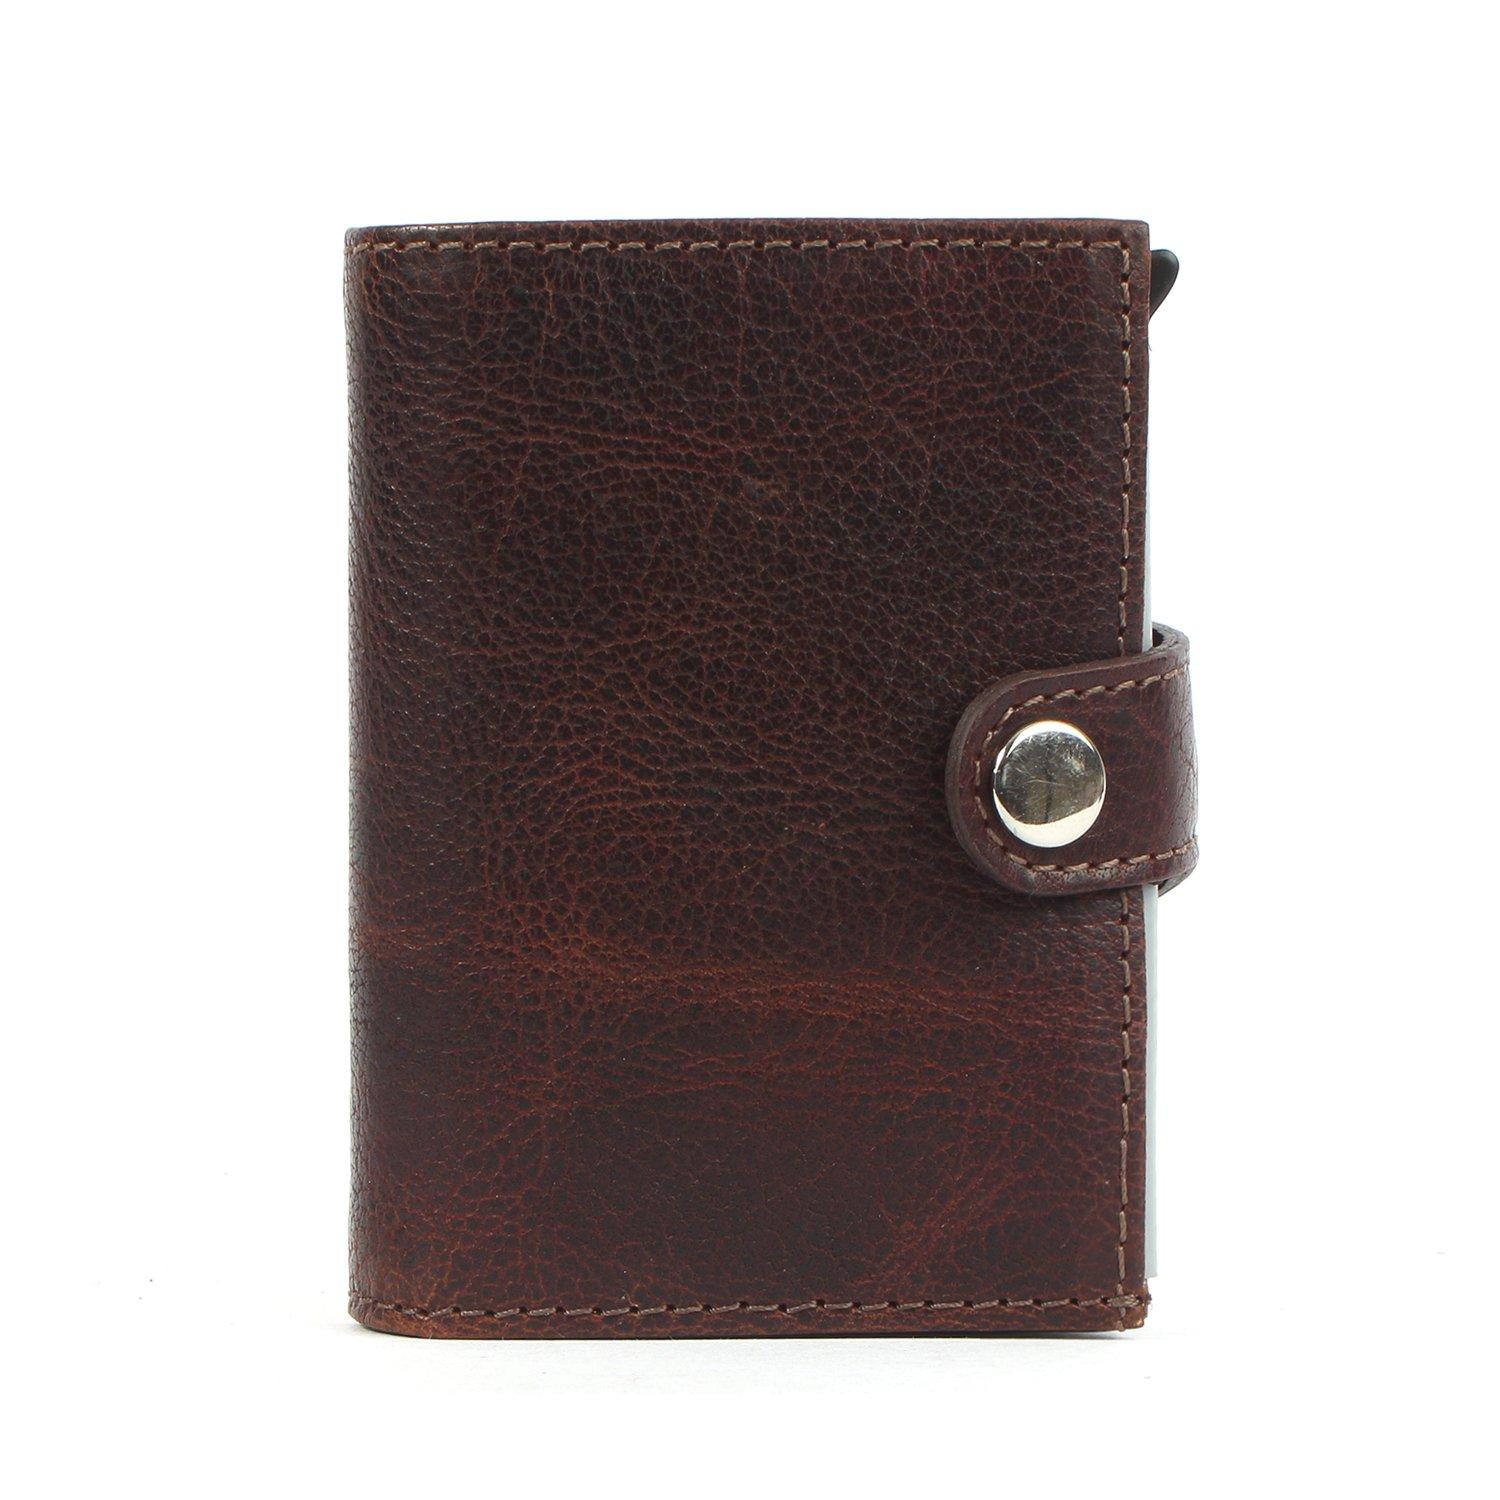 Margelisch  noonyu double leather brown 